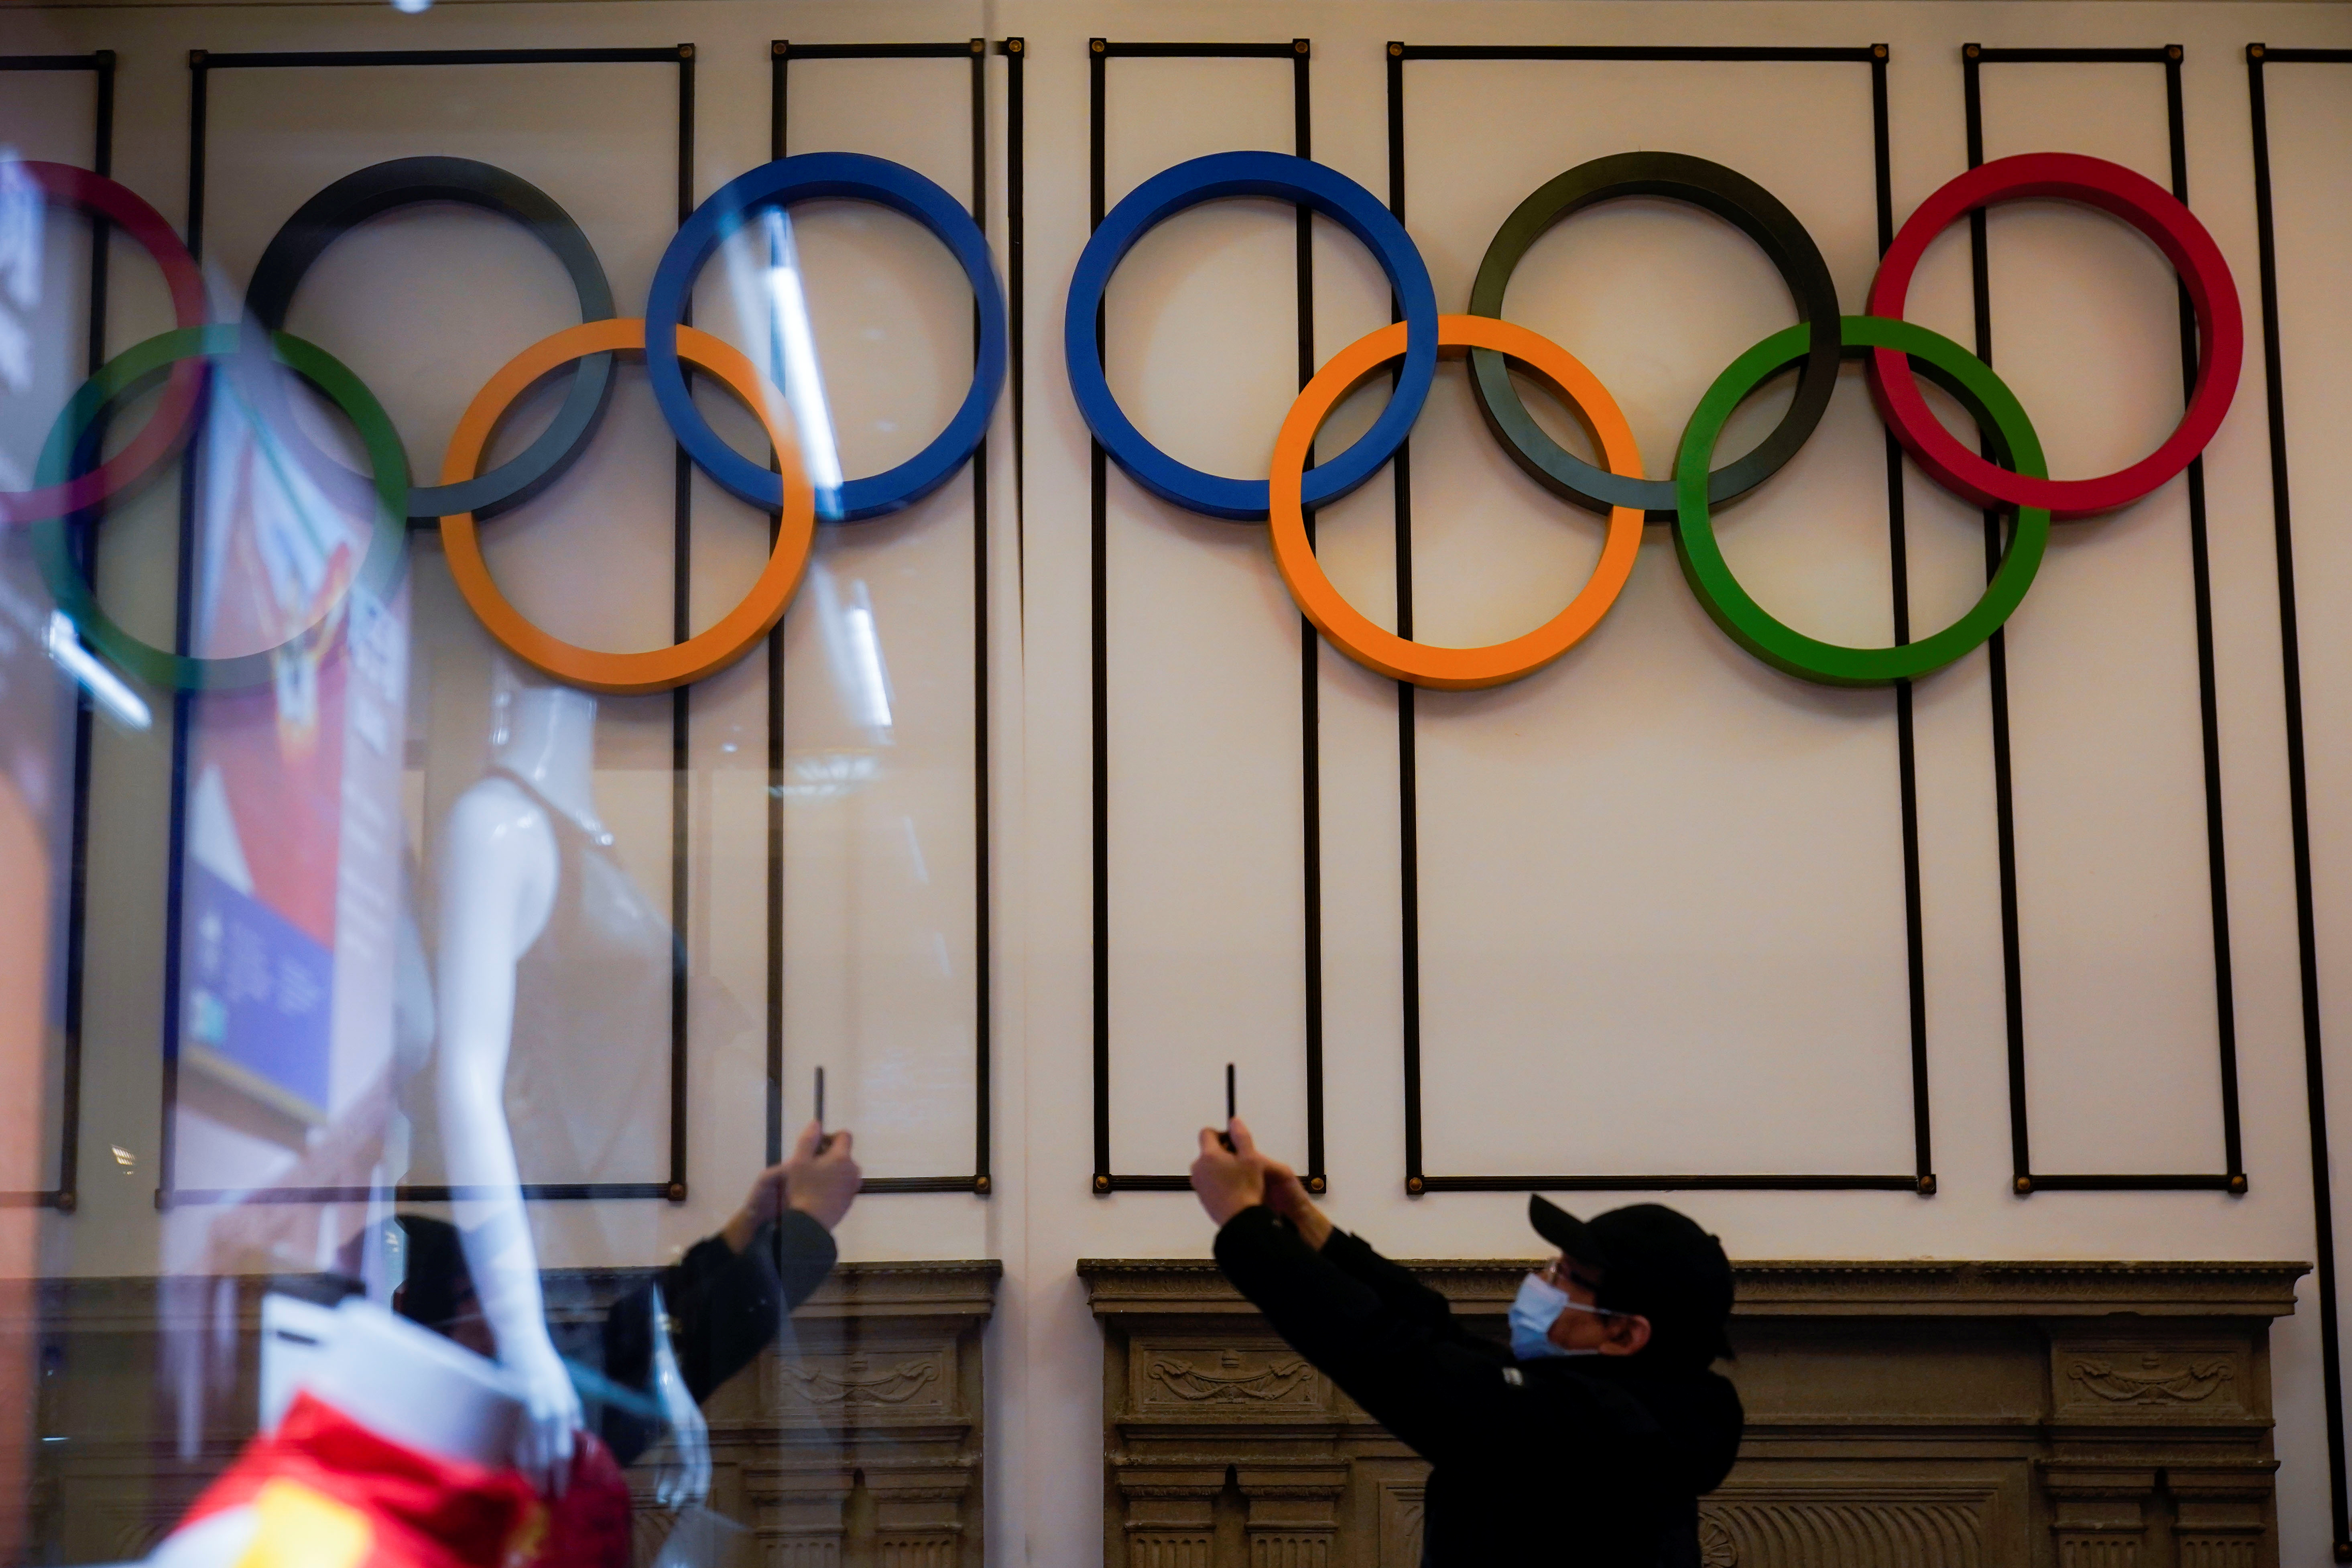 A visitor takes pictures near Olympic rings displayed at the Shanghai Sports Museum in Shanghai